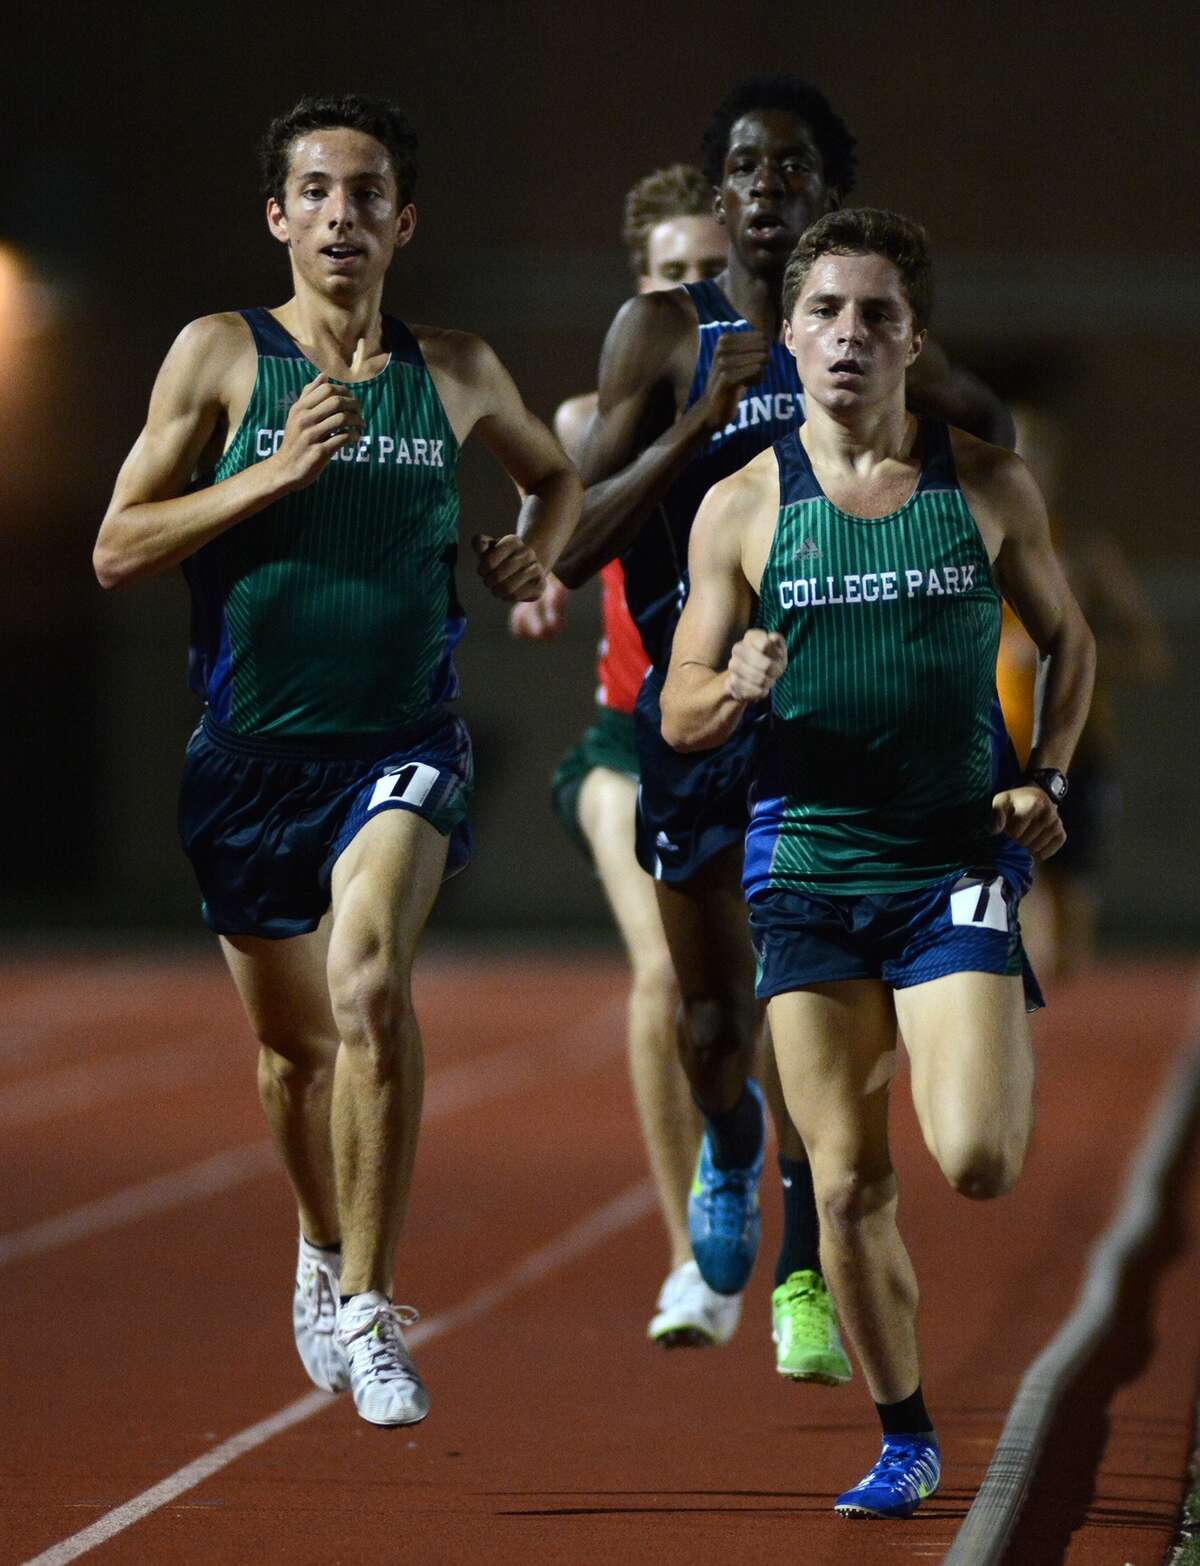 College Park's Connor Meaux, right, and Colton Nettleton lead the pack in the Boys 1600 Meter Run at the District 15/16-6A Area Track Meet at Turner Stadium in Humble on Thursday, April 23, 2015.